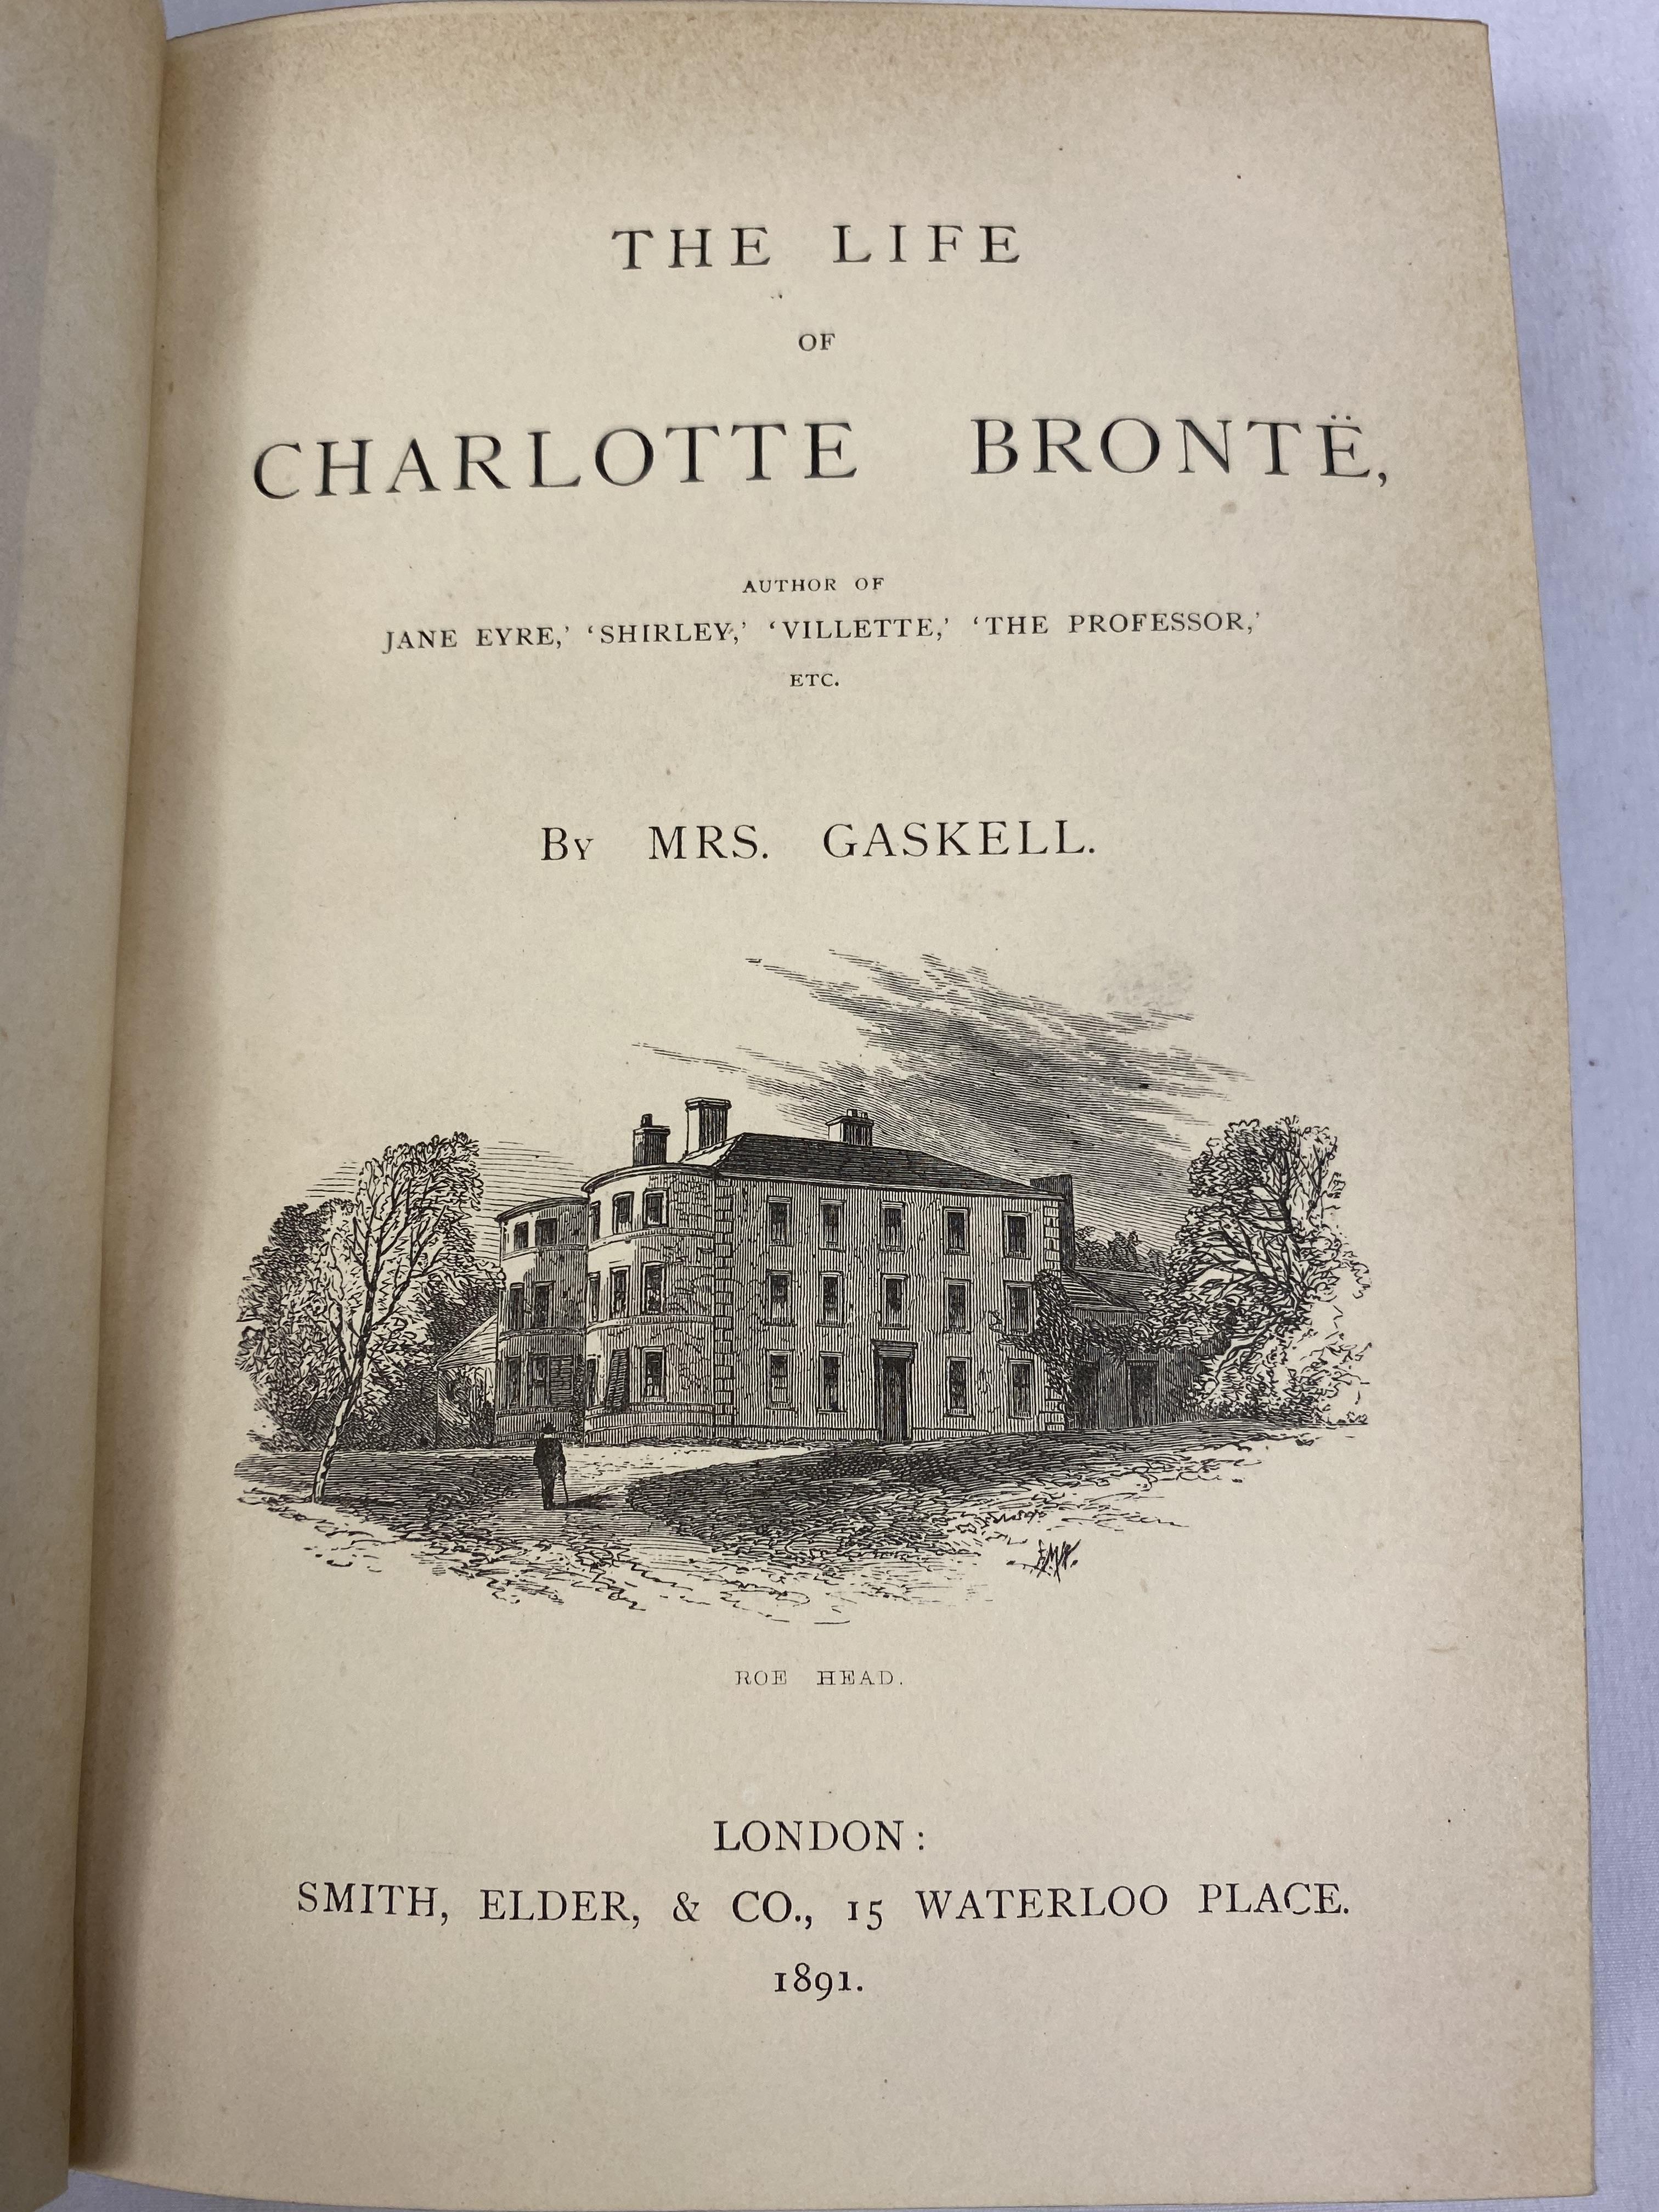 The Life and Works of Charlotte Bronte published and illustrated in seven half bound volumes - Image 5 of 9